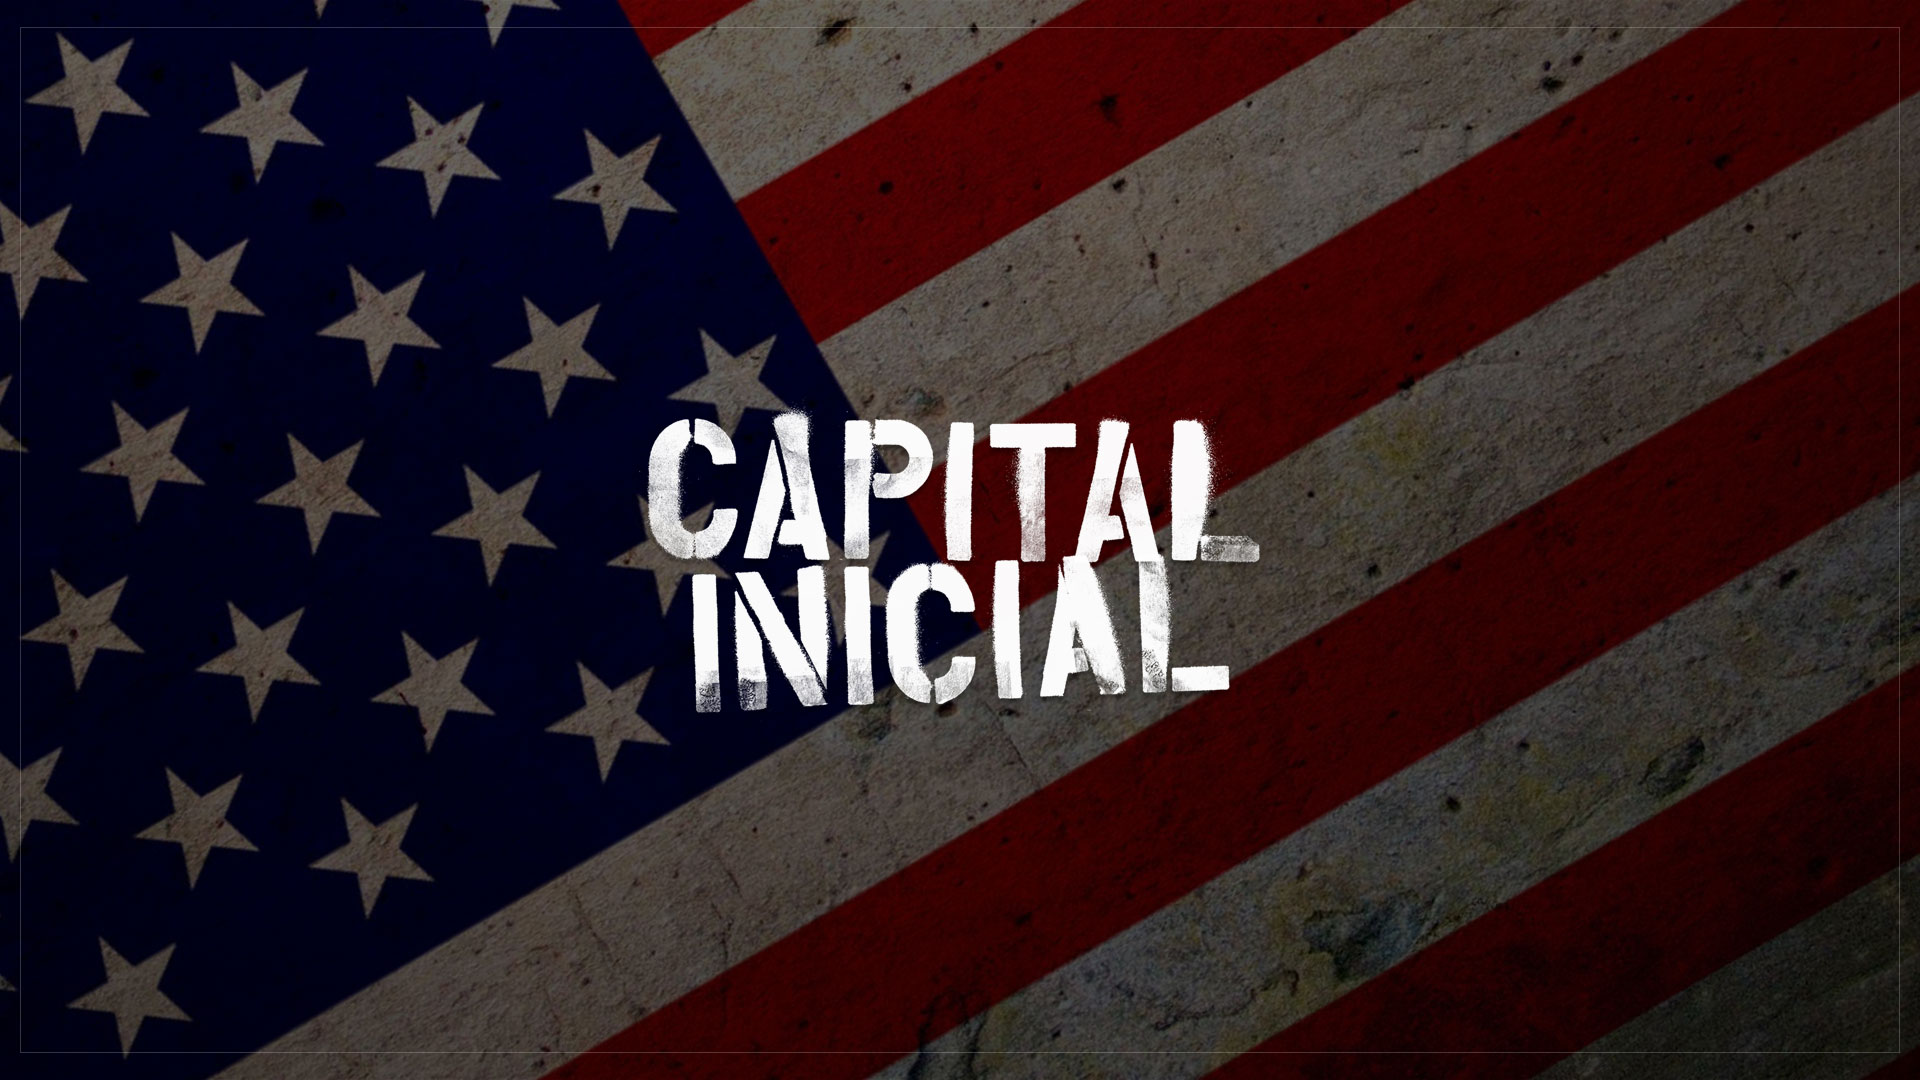 Capital Inicial Wallpapers